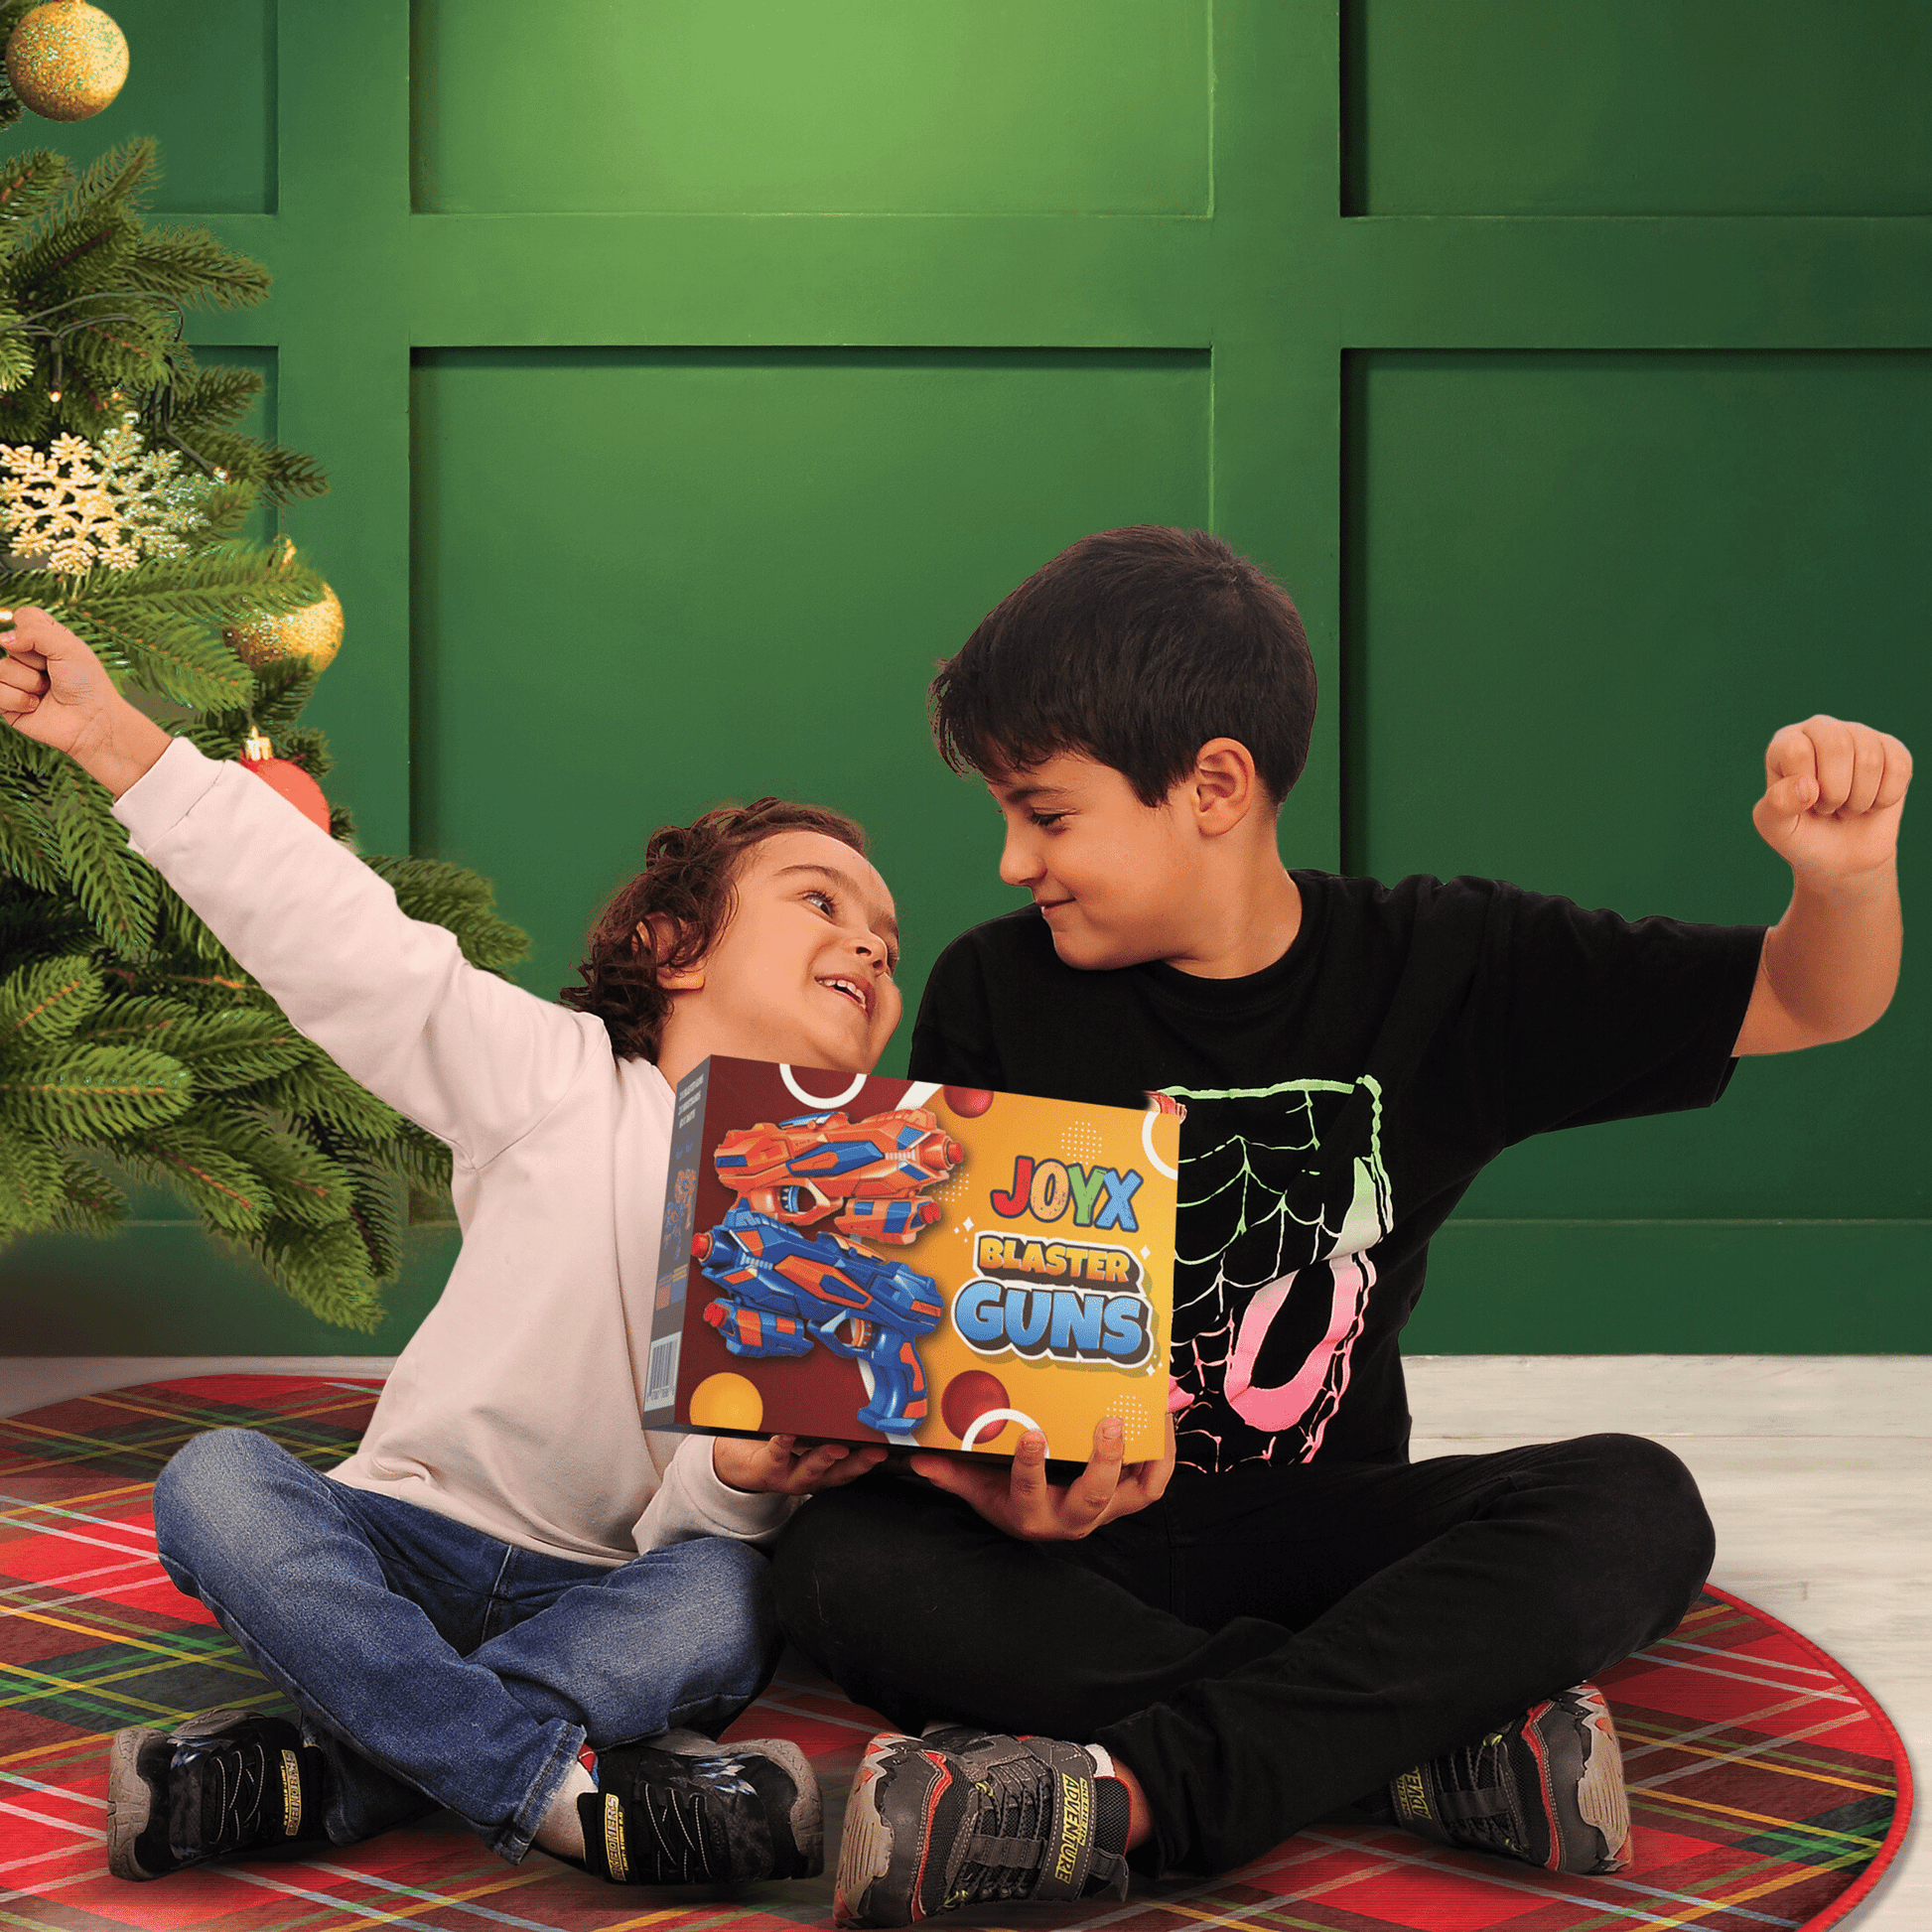 Two joyful children sitting by a Christmas tree, excitedly holding a box of JoyX Blaster Guns, celebrating a festive gift moment.